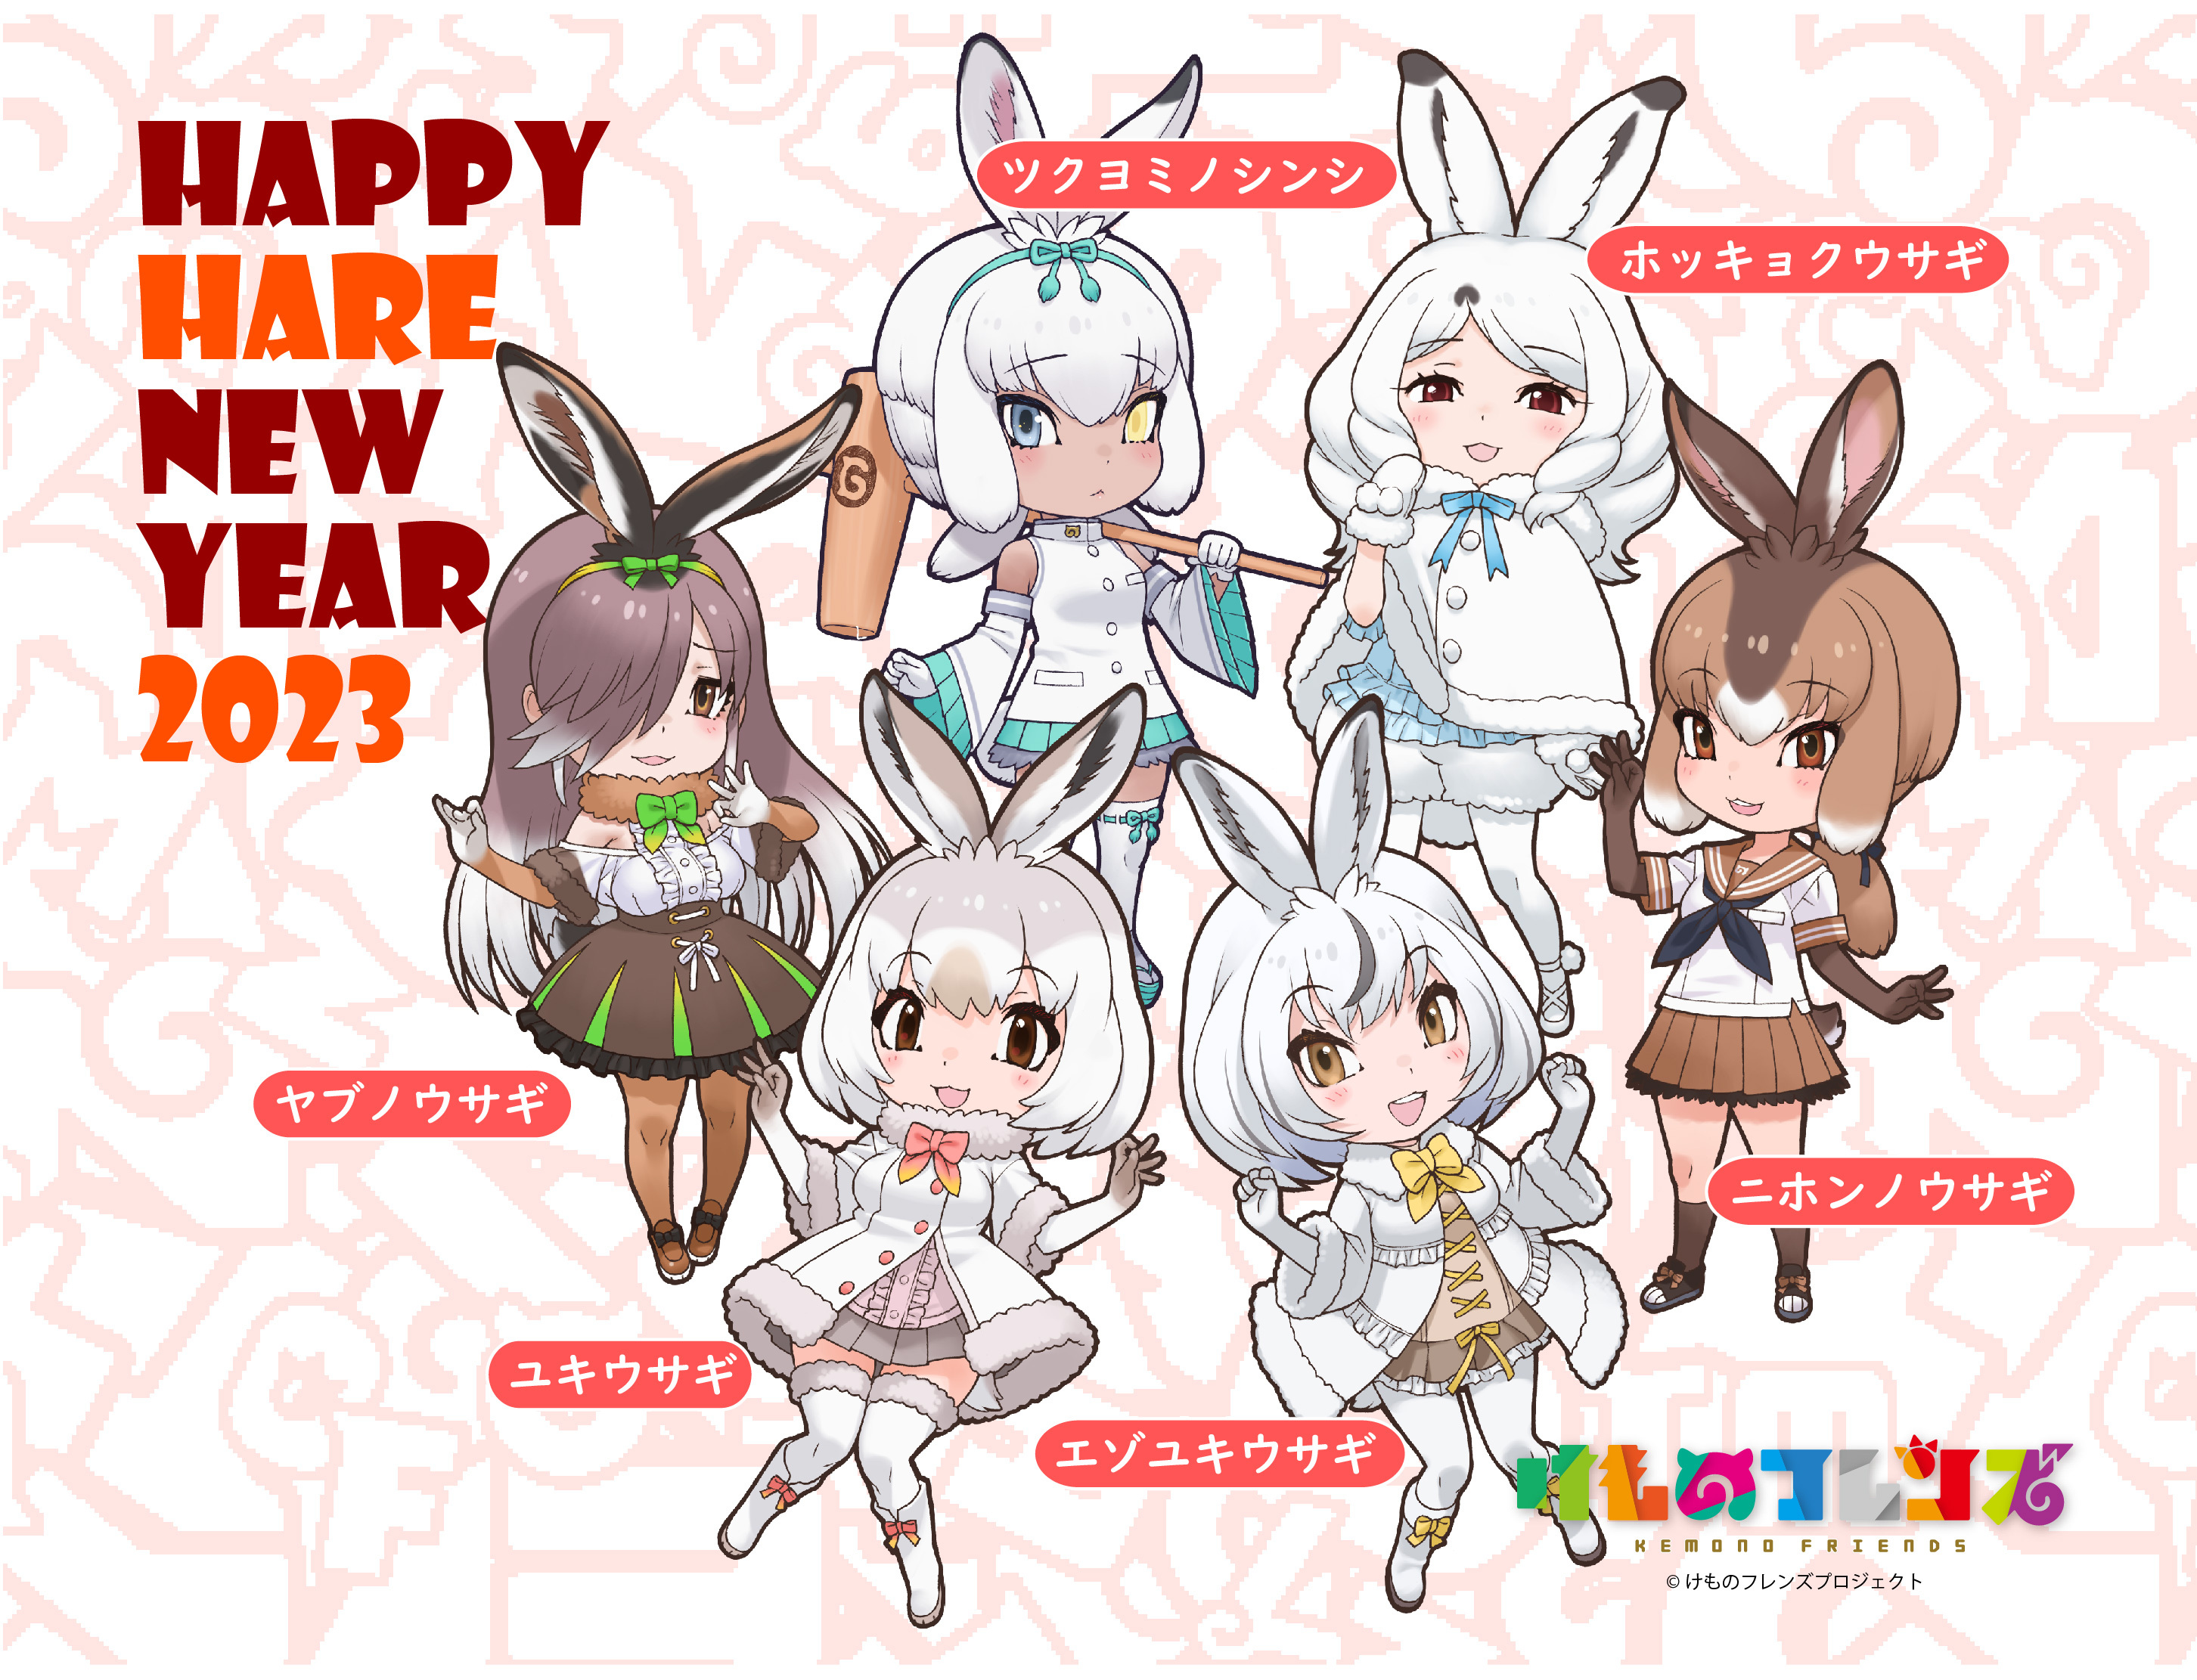 Year of Hare poster posted by Kemono Friends Project Twitter account.